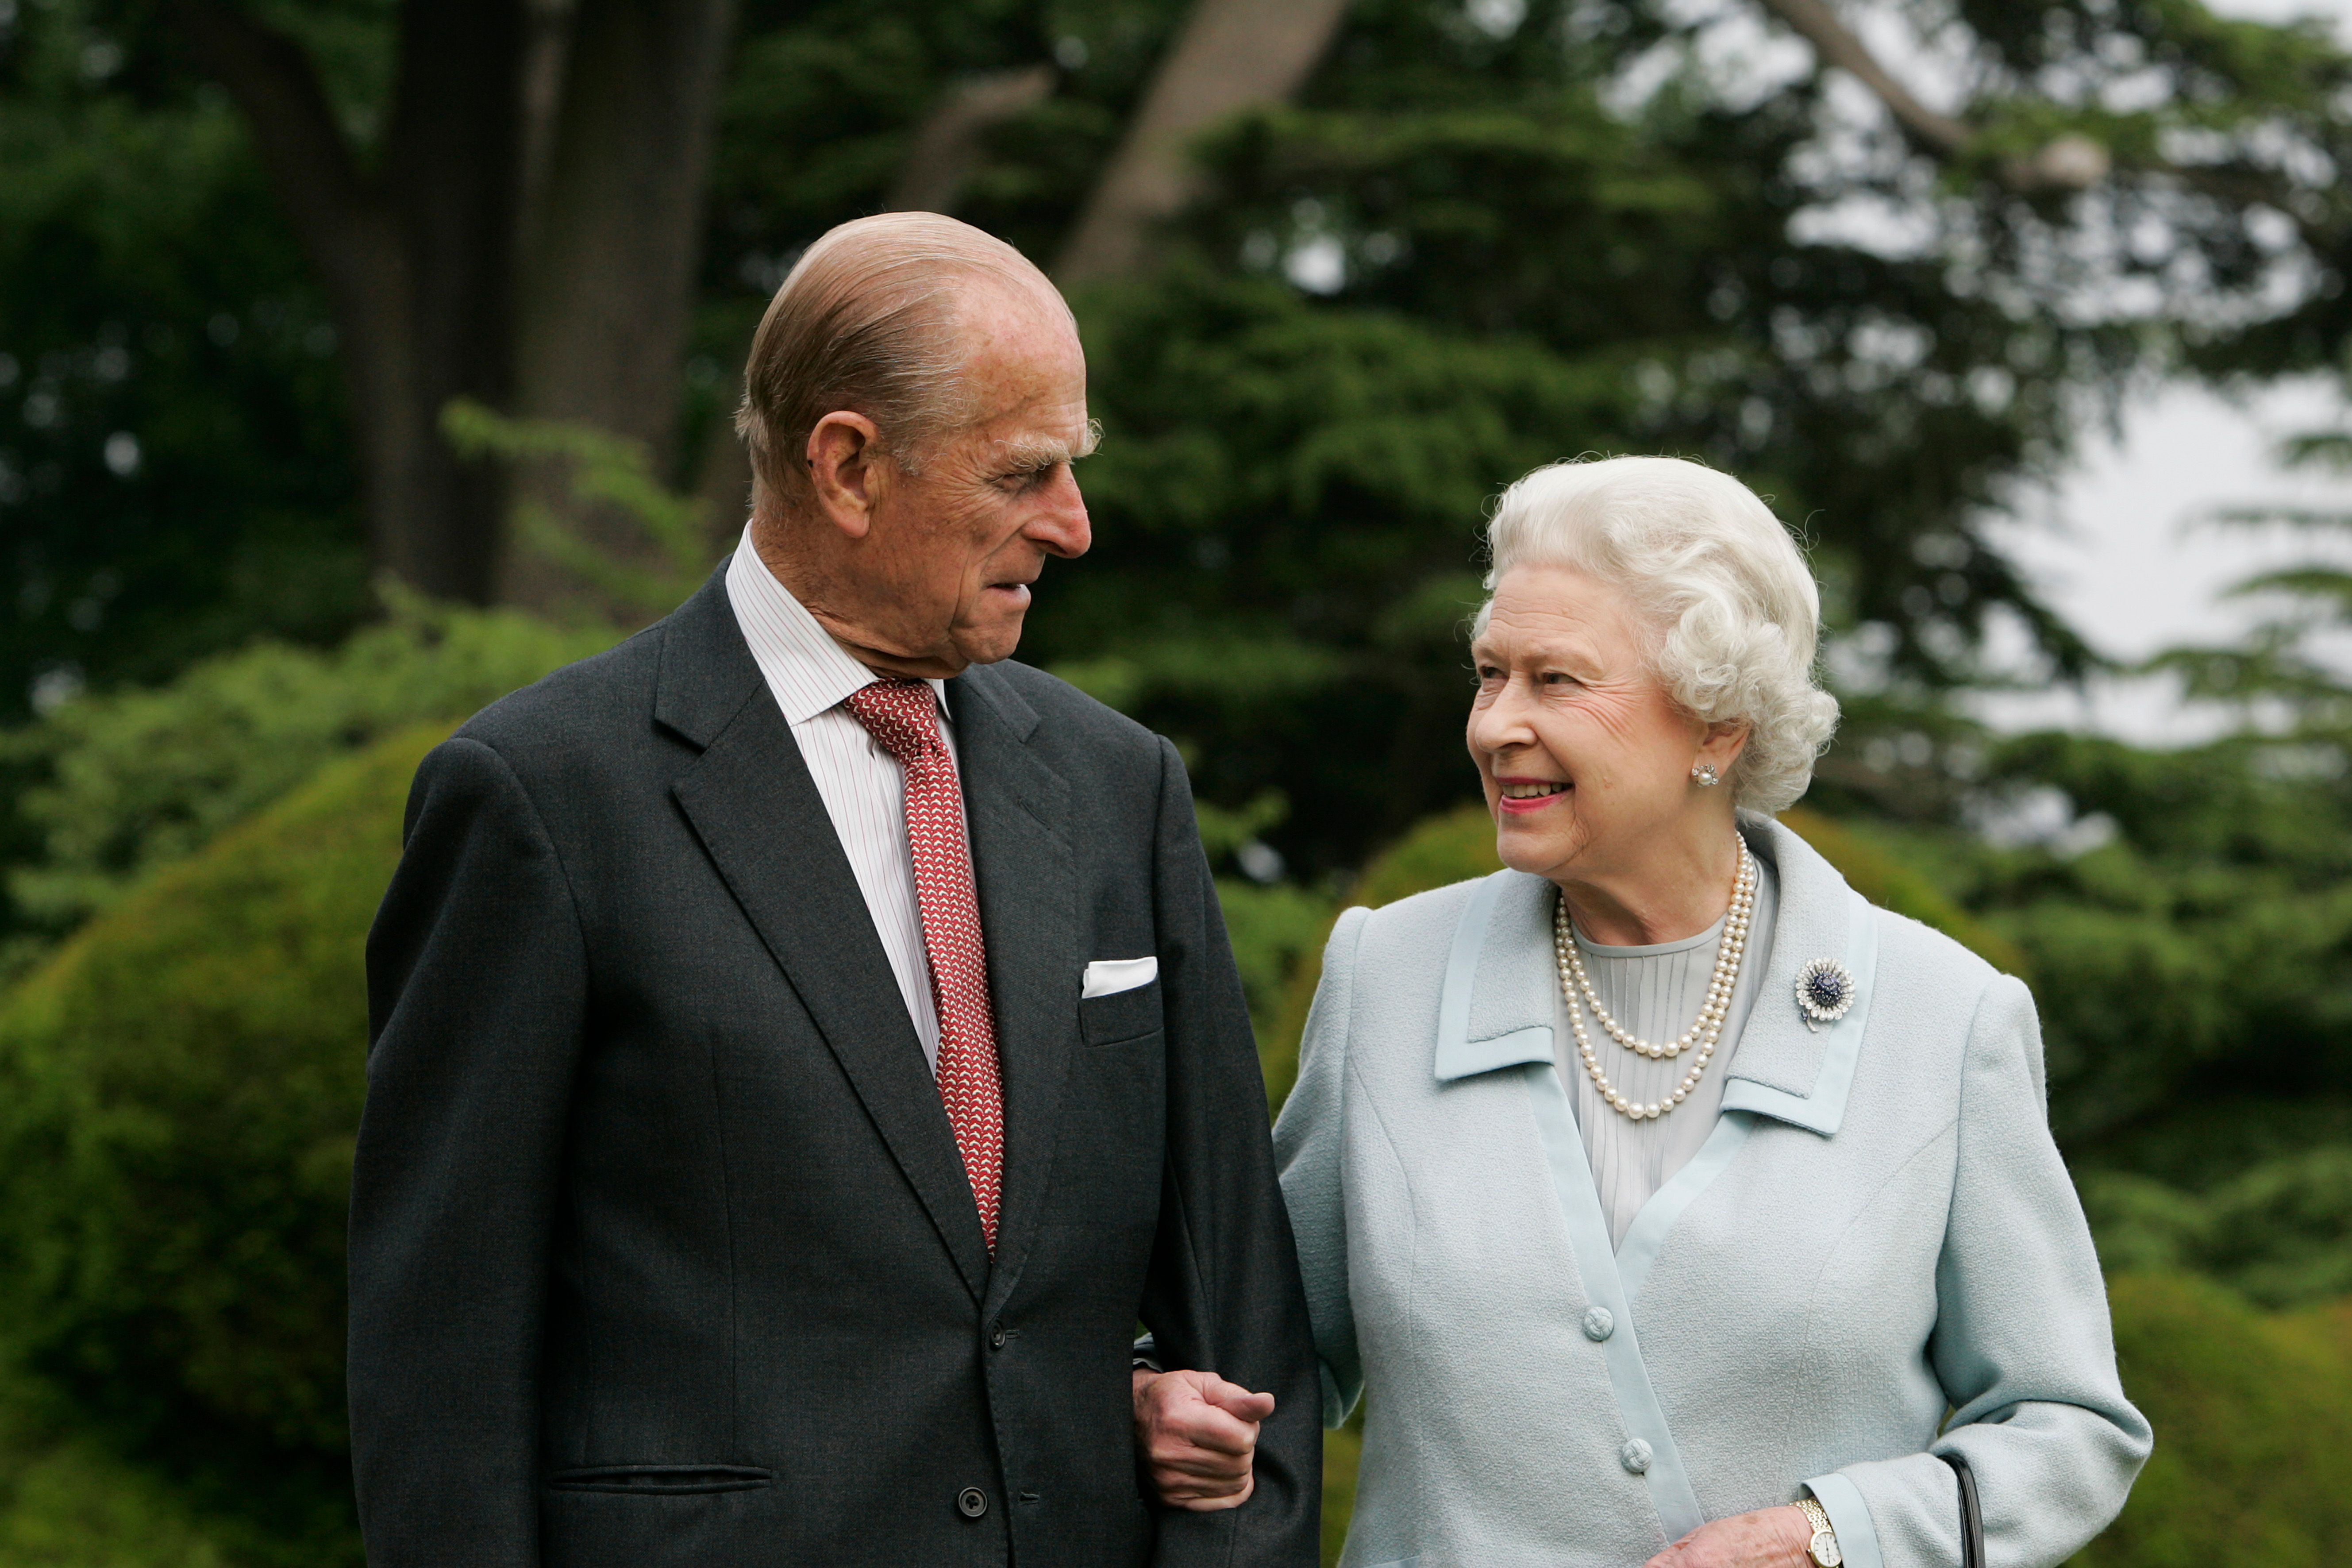 Queen Elizabeth II and Prince Philip marking their Diamond Wedding Anniversary in November 2007. | Photo: Getty Images